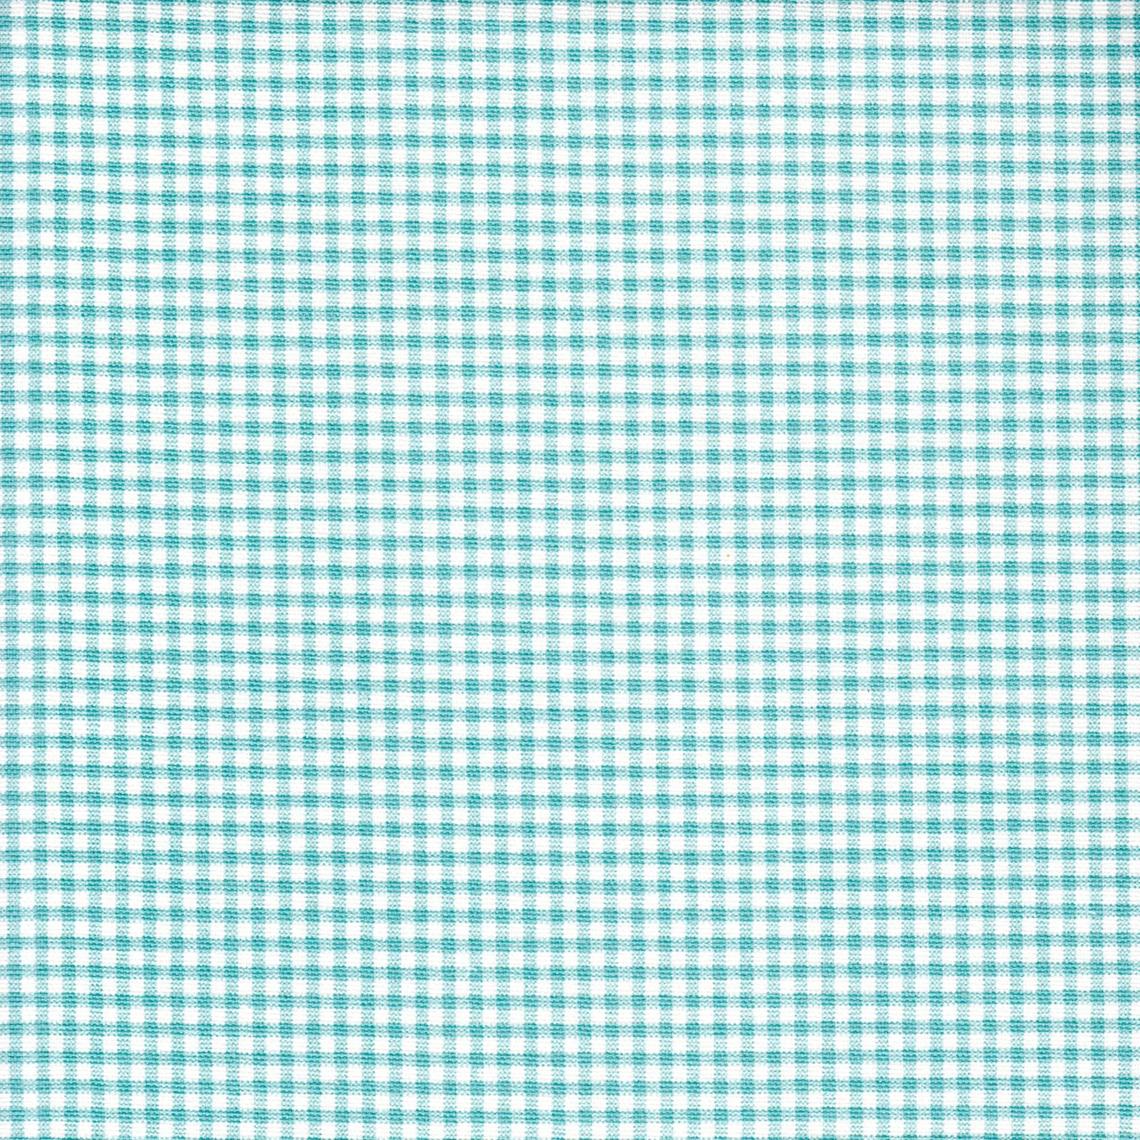 pillow sham in farmhouse turquoise blue gingham check on cream